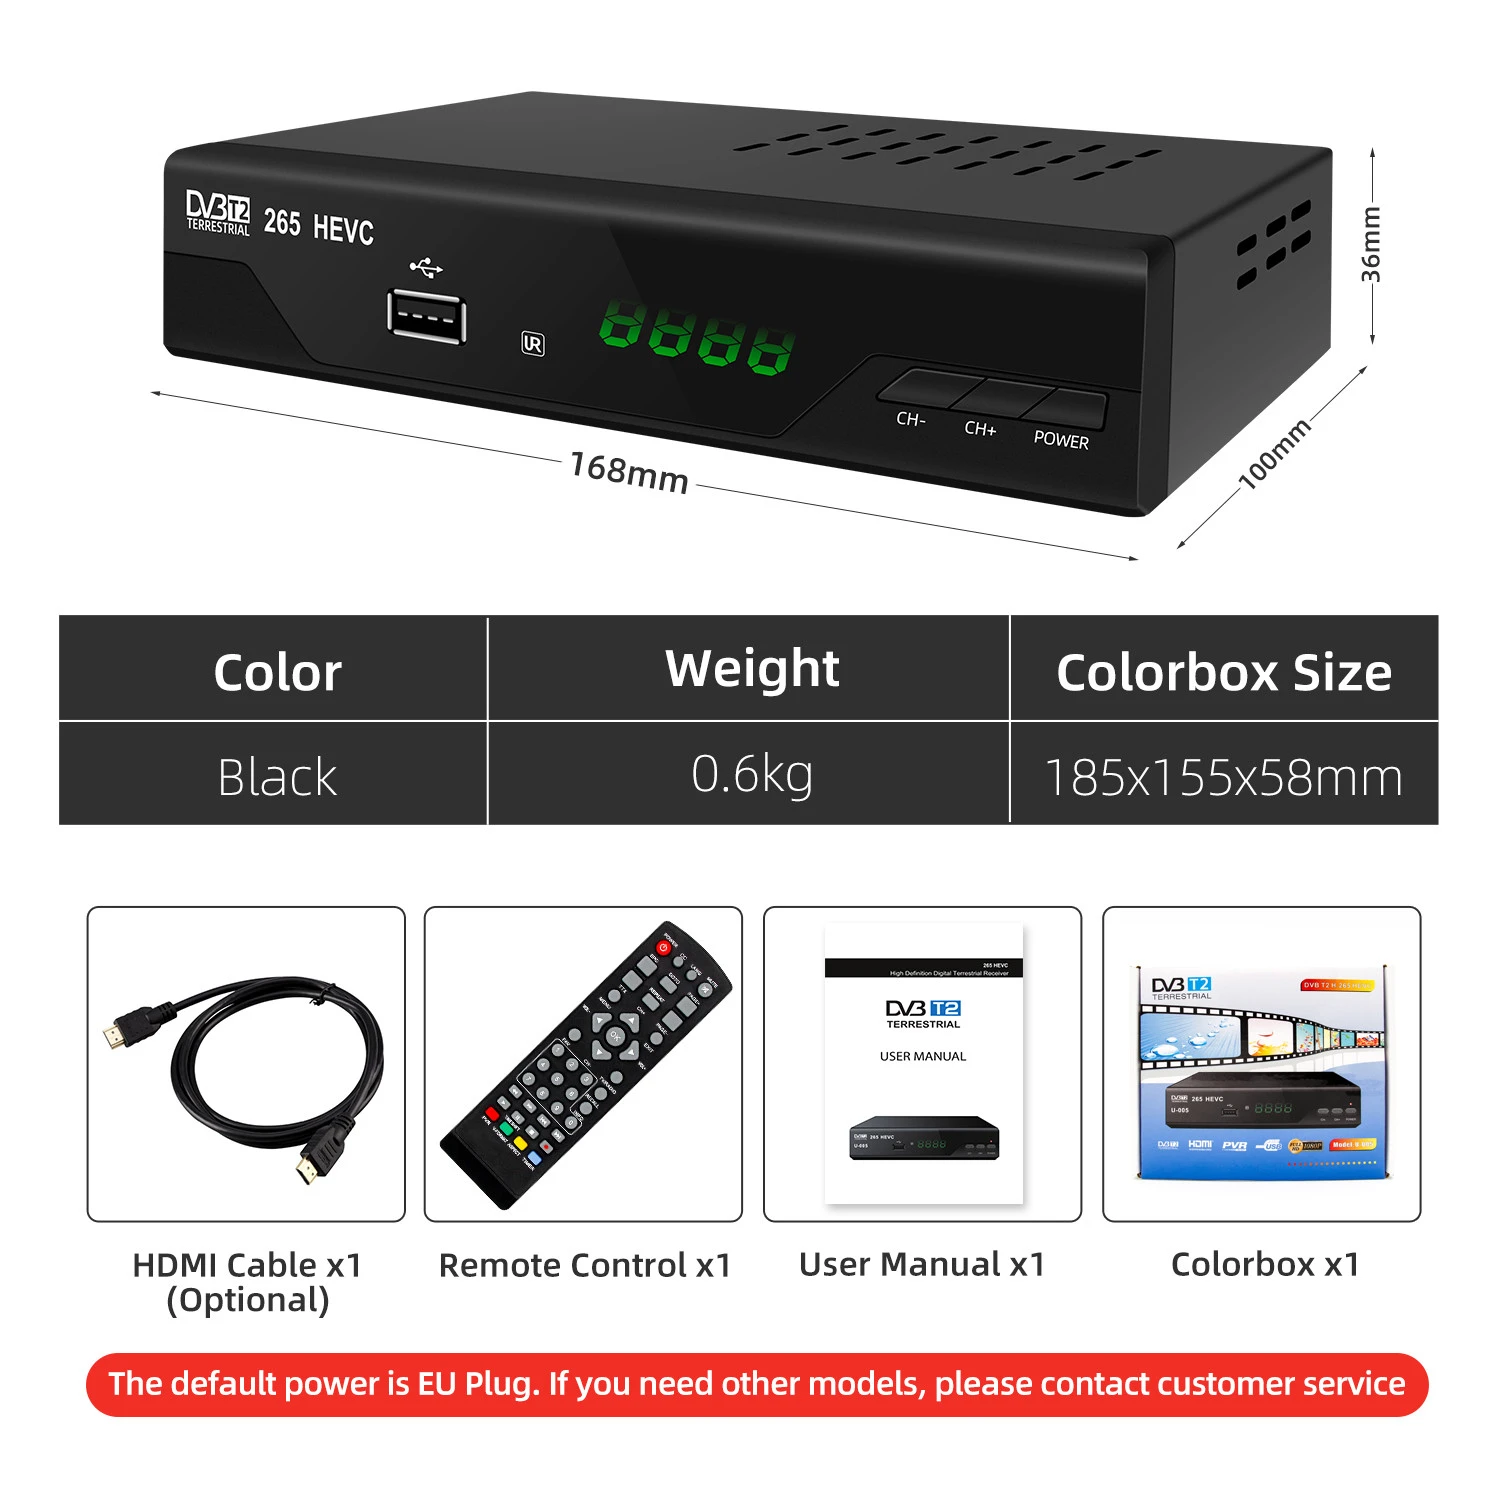 Junuo Digital TV Tuner for HEVC H.265 DVB-T2 FTA TV Receiver with Ethernet for Italy